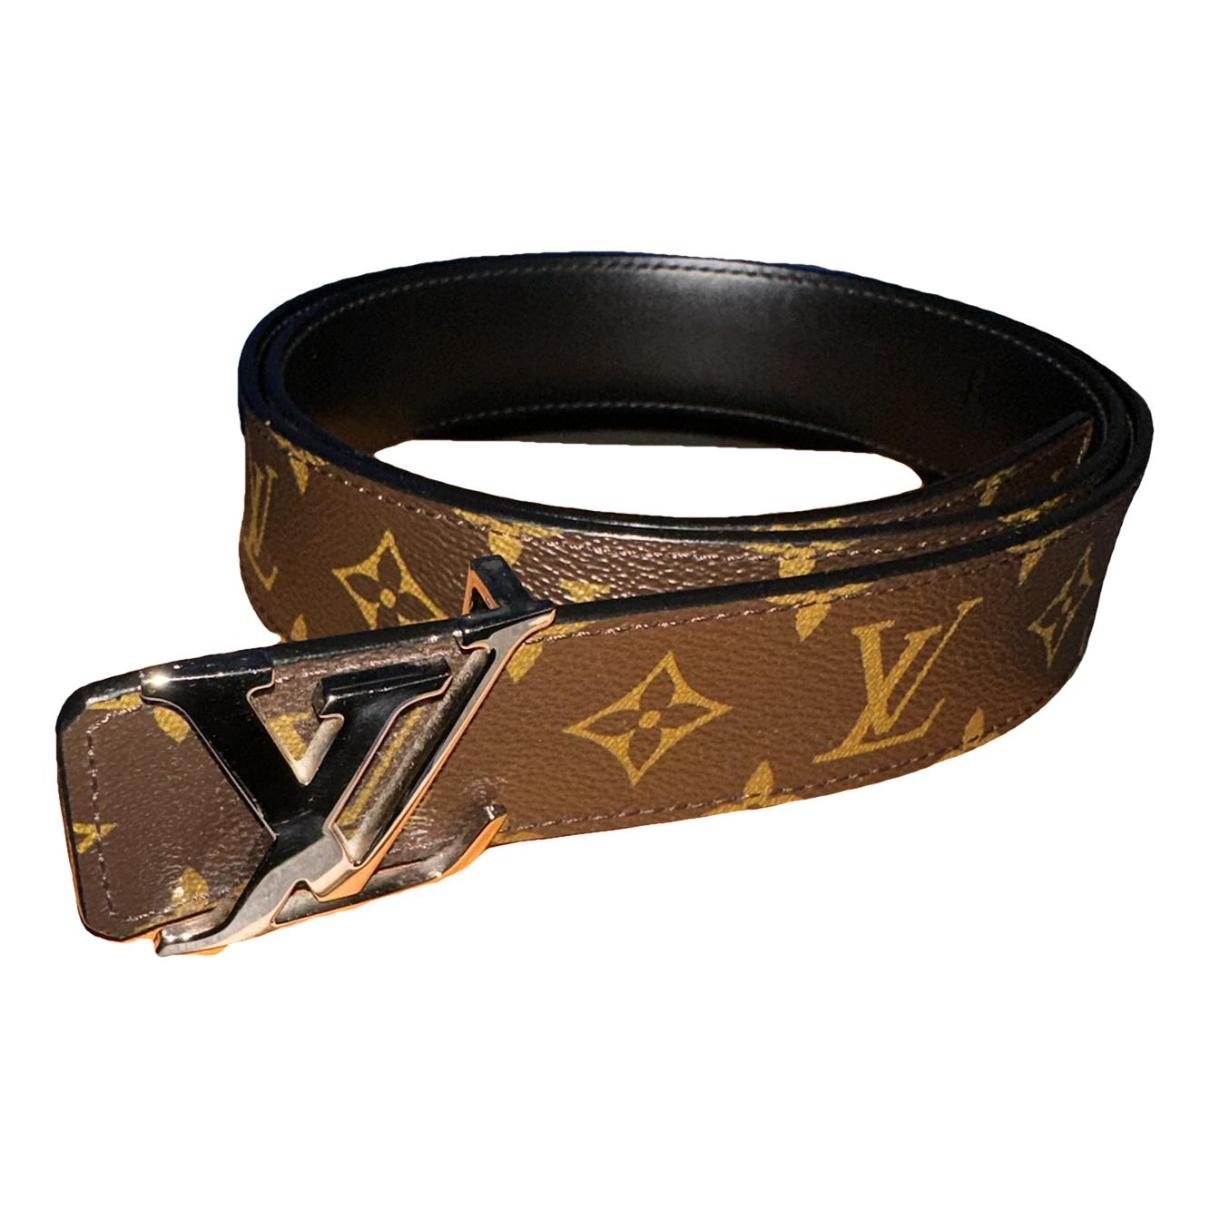 Initiales leather belt Louis Vuitton Brown size 100 cm in Leather - 38789453